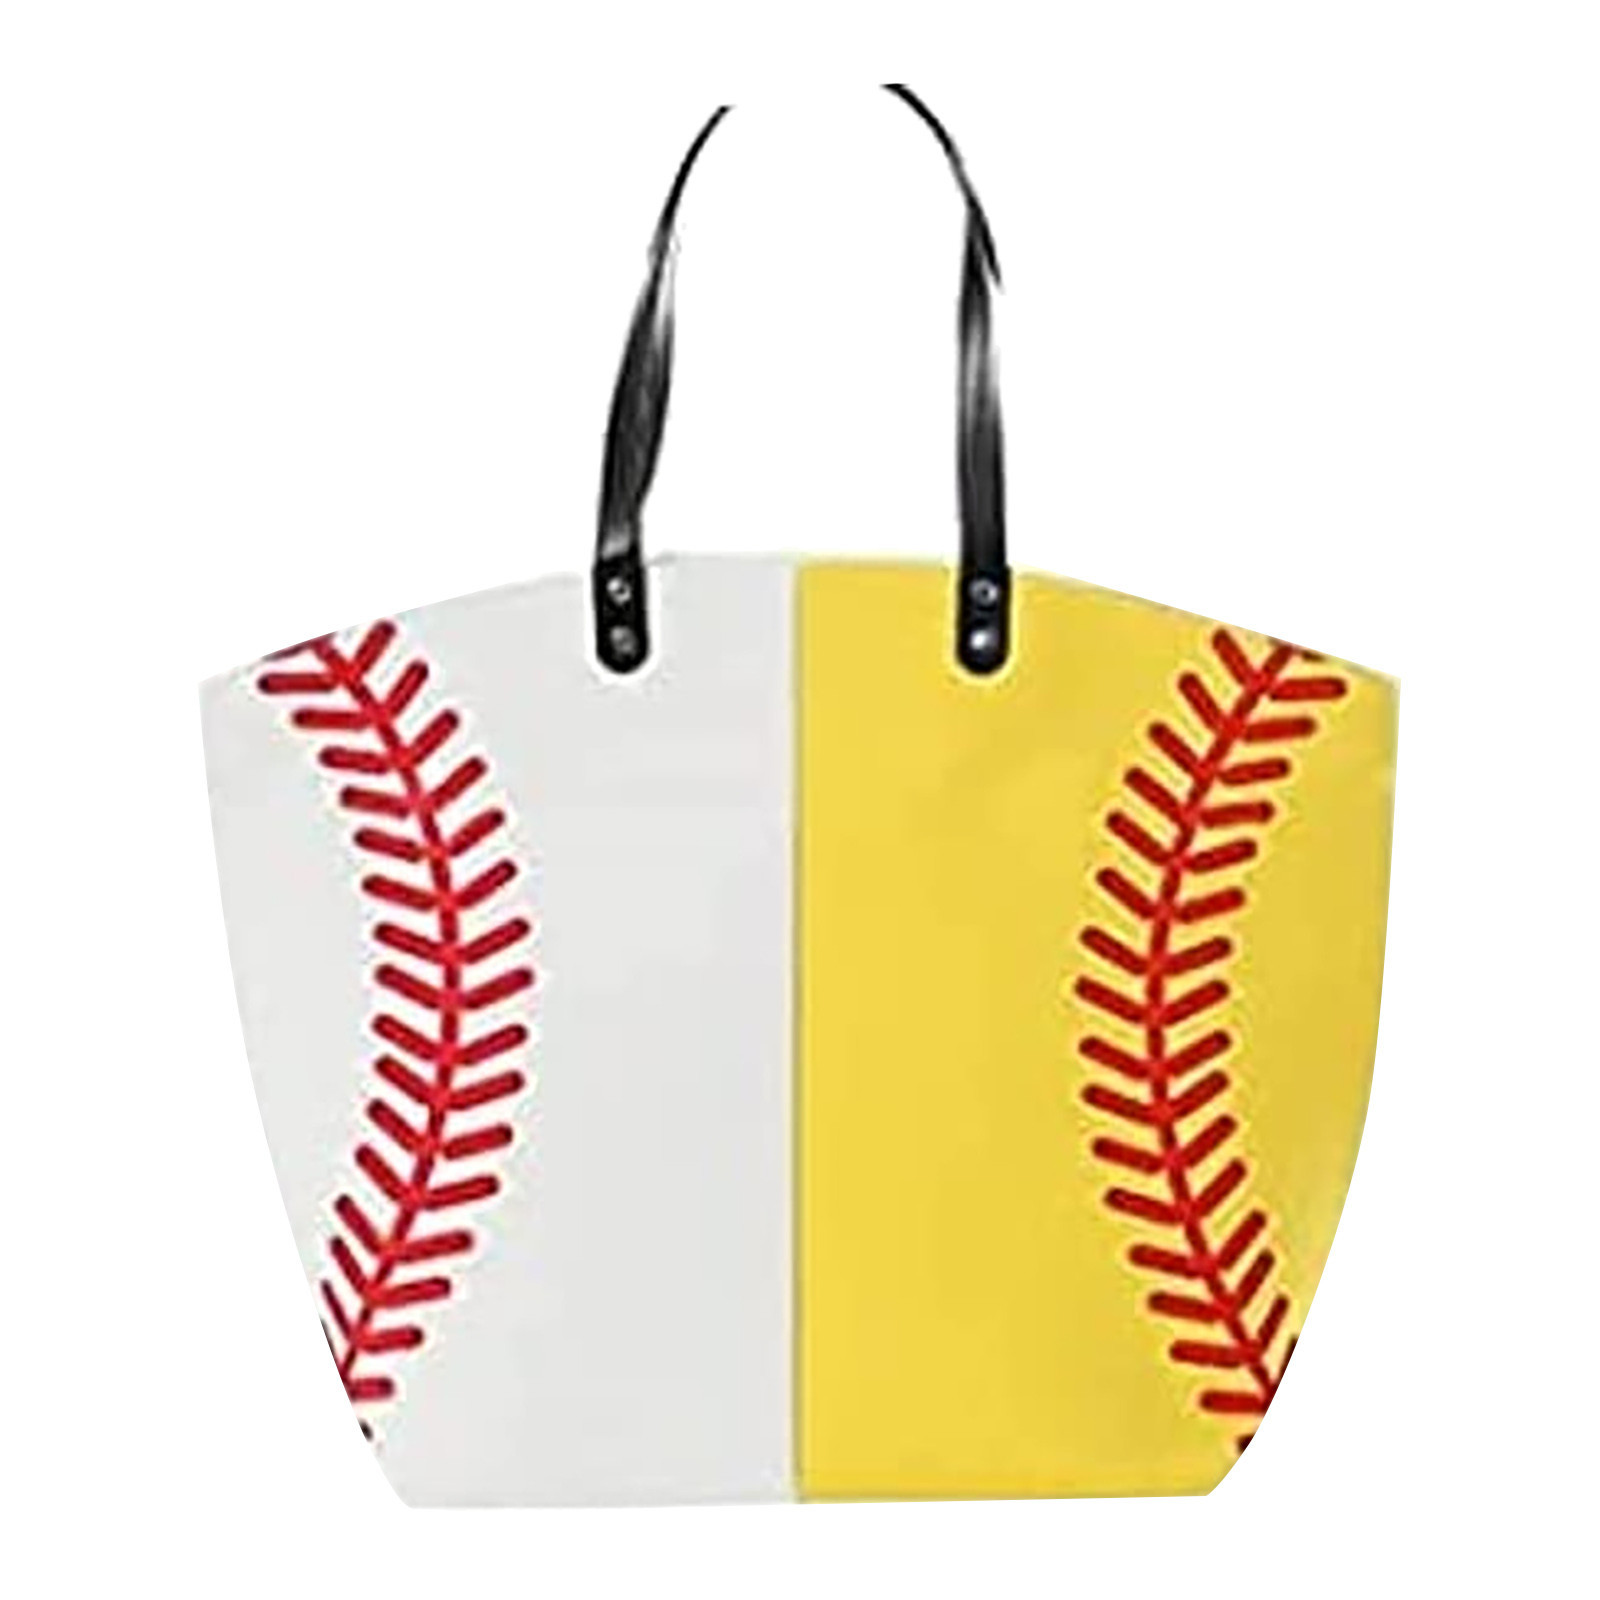 Hachum Women'S Soccer Canvas Tote Bag,Sports Beach Bag Casual Oversized ...